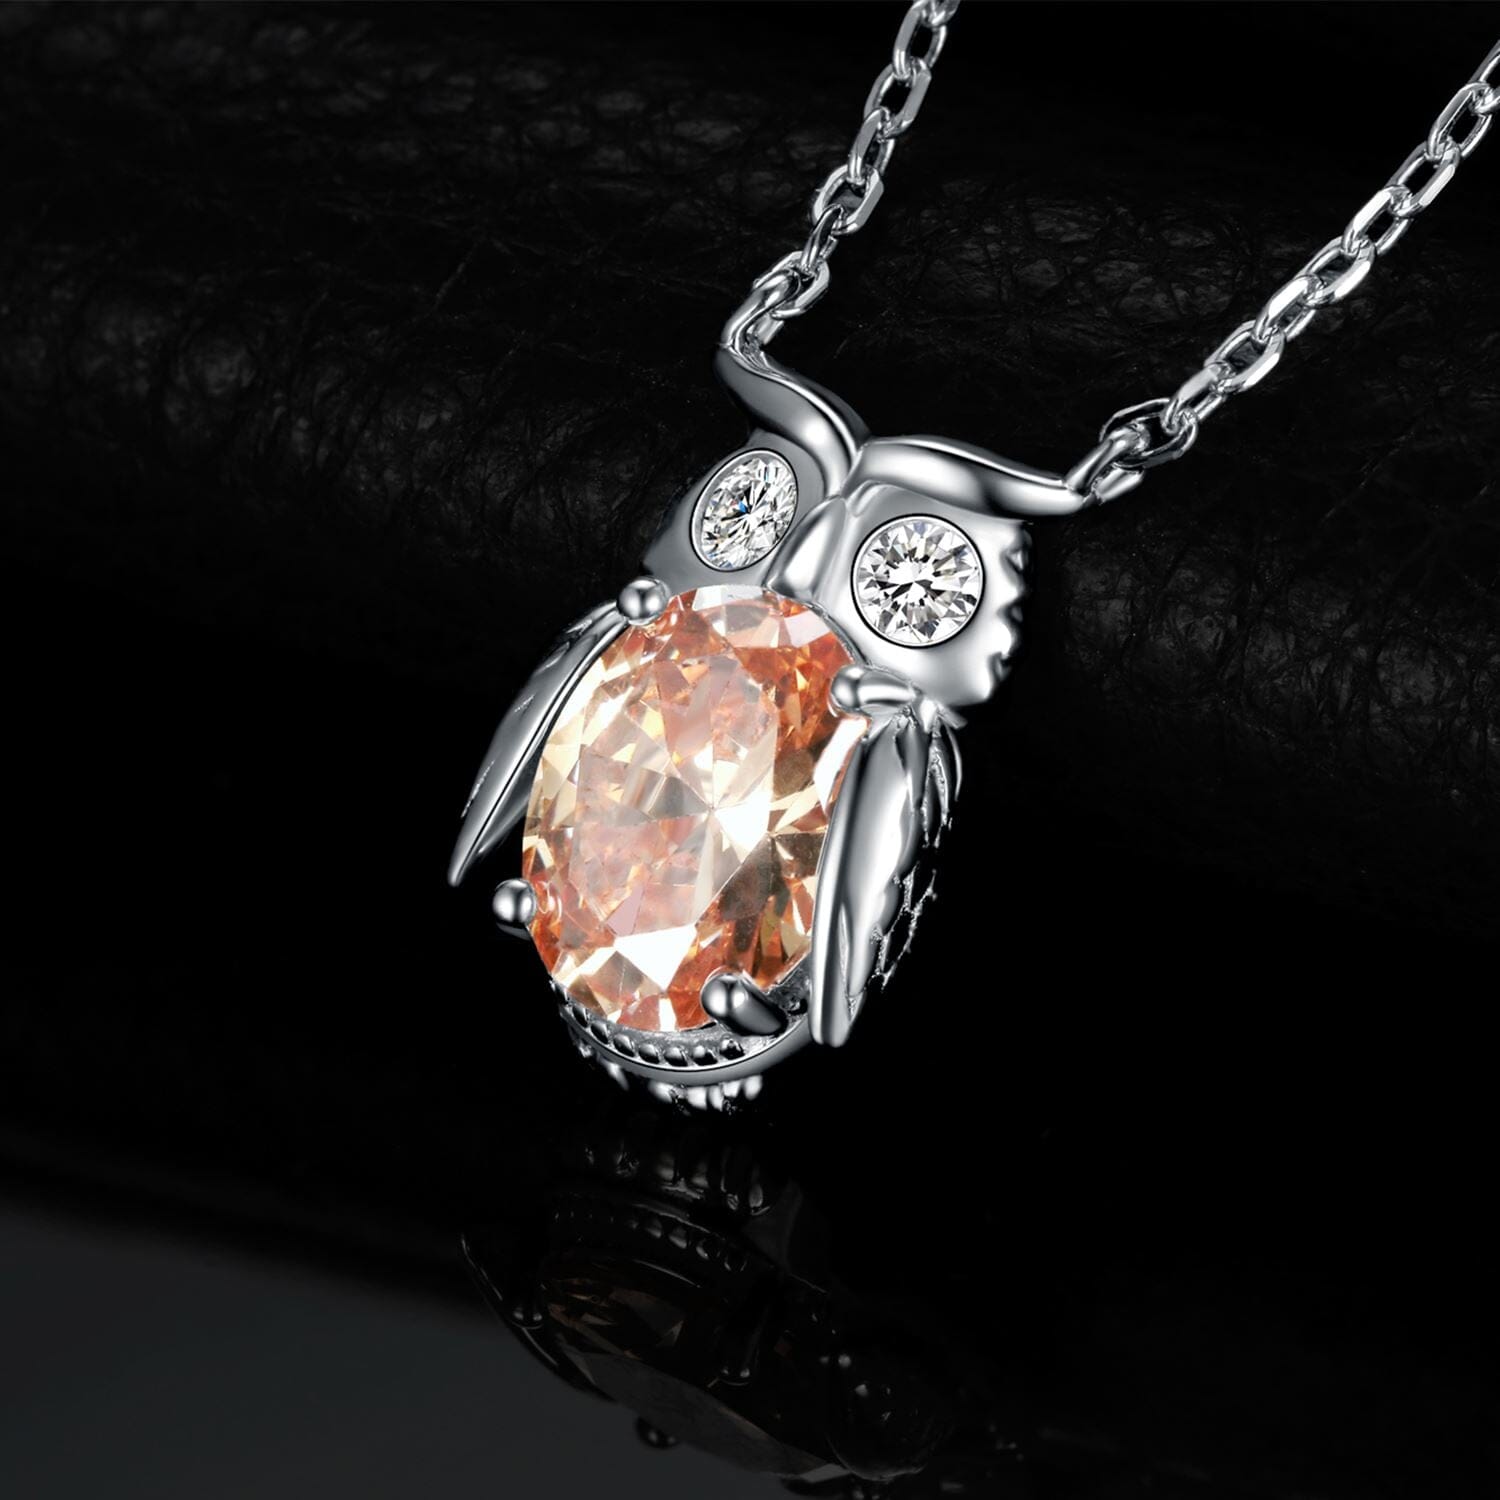 Cute Owl 3.3ct Yellow Gemstone 925 Sterling Silver Pendant NecklaceNecklace